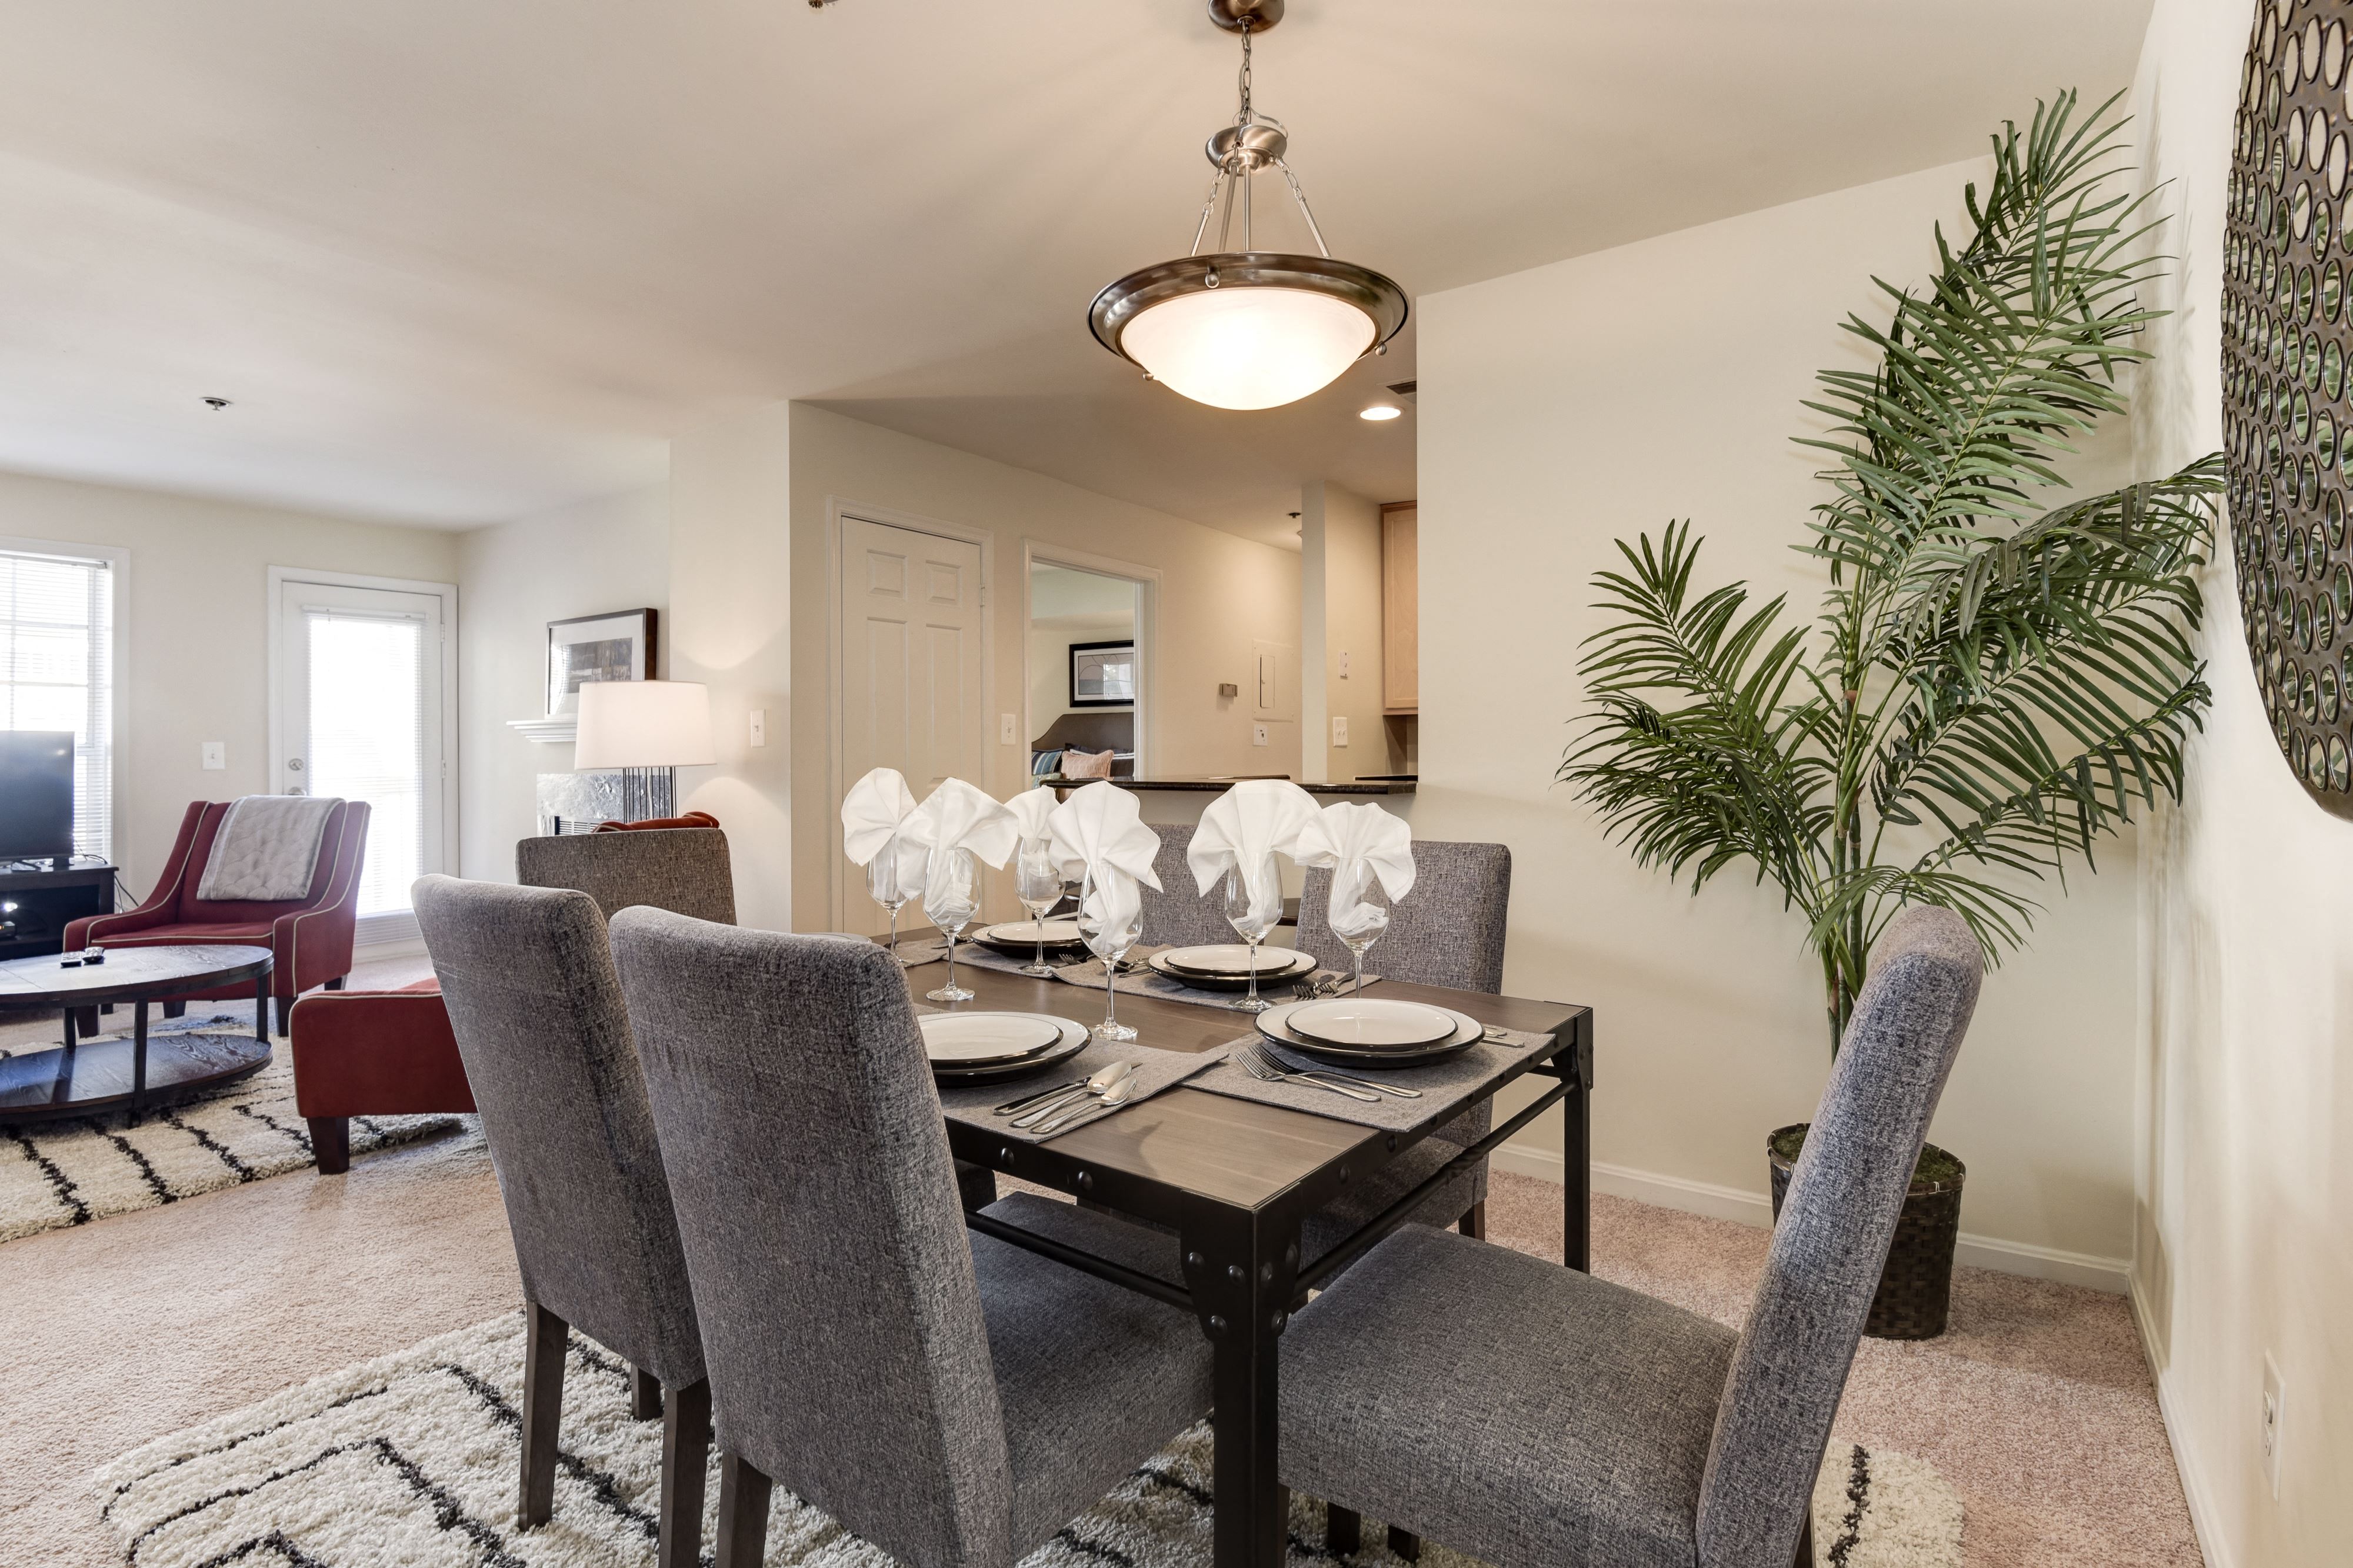 Dining area included in open living spaces